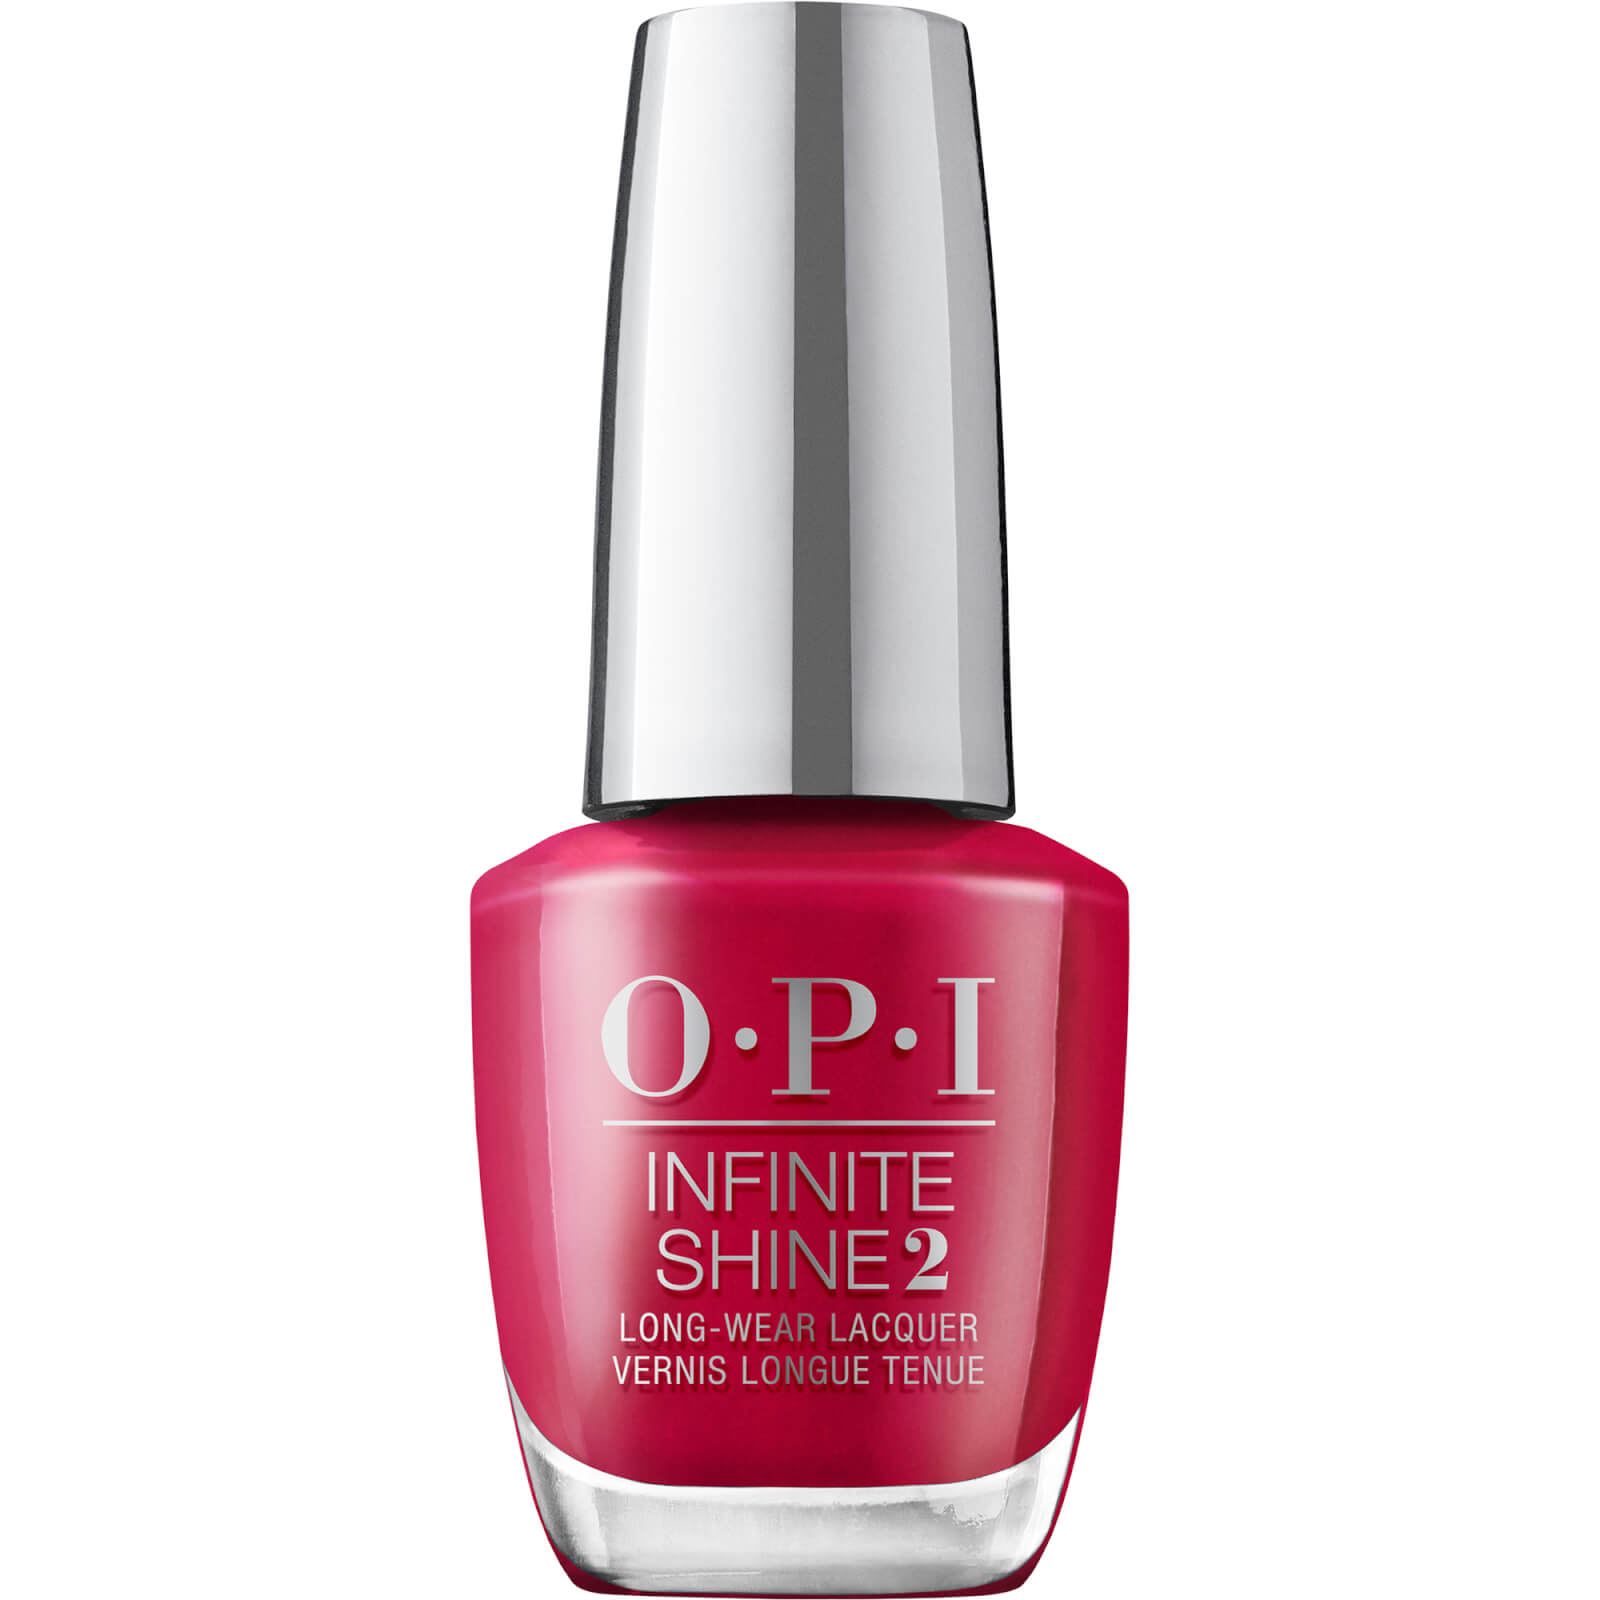 OPI Fall Wonders Collection Infinite Shine Long-Wear Nail Polish 15ml (Various Shades) - Red-Veal Your Truth